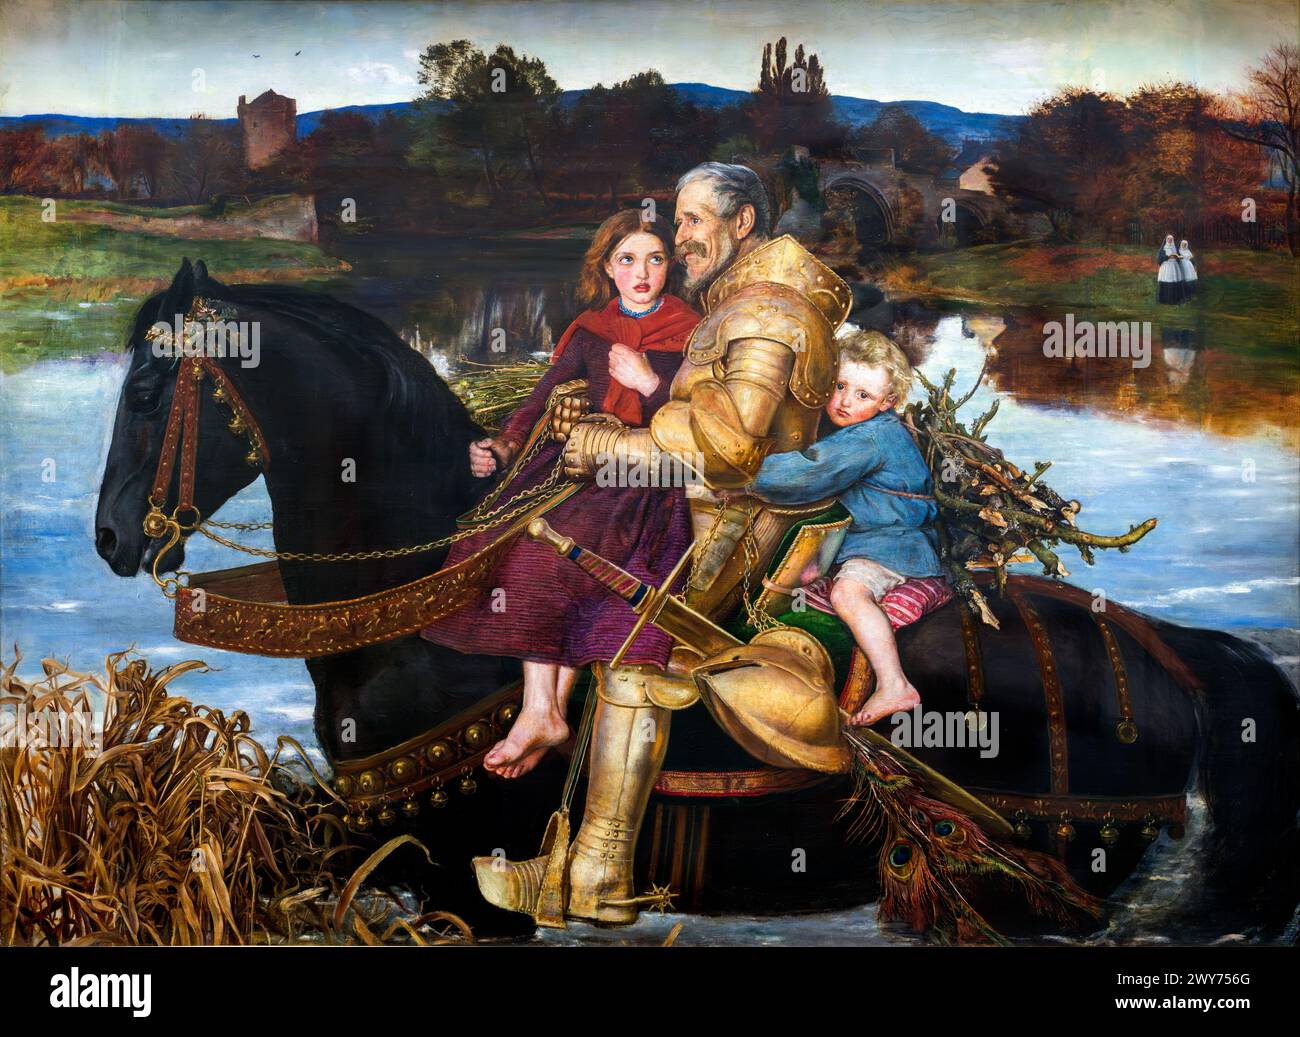 A Dream of the Past. Sir Isumbras at the Ford by John Everett Millais (1829-1896), 1856/7 Stock Photo